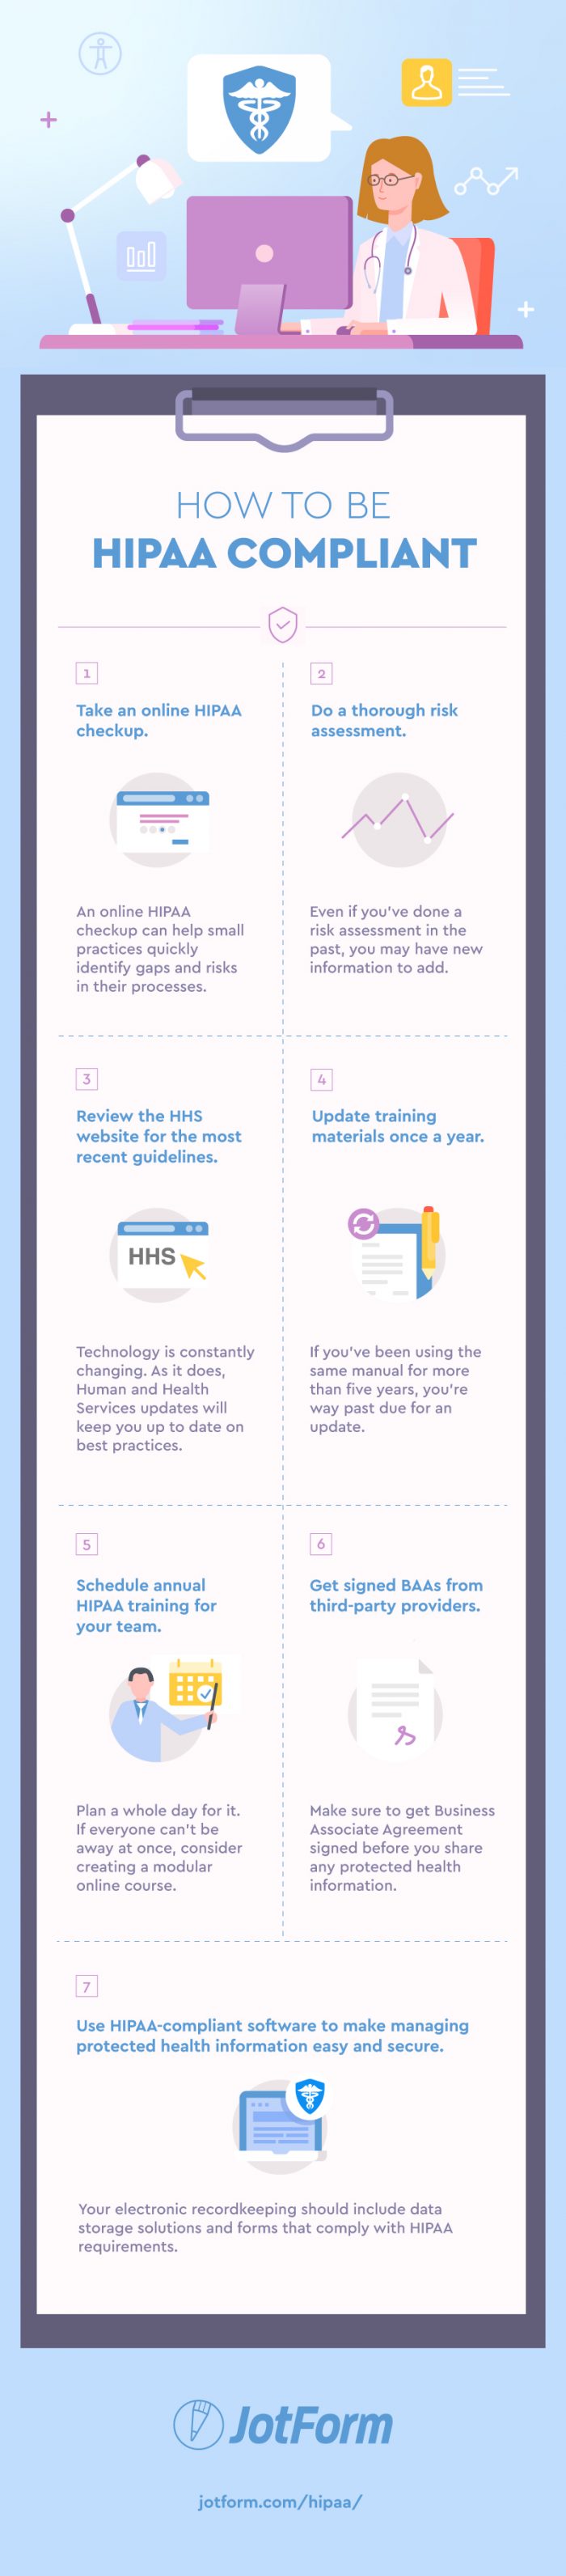 Follow these steps to become fully HIPAA-compliant